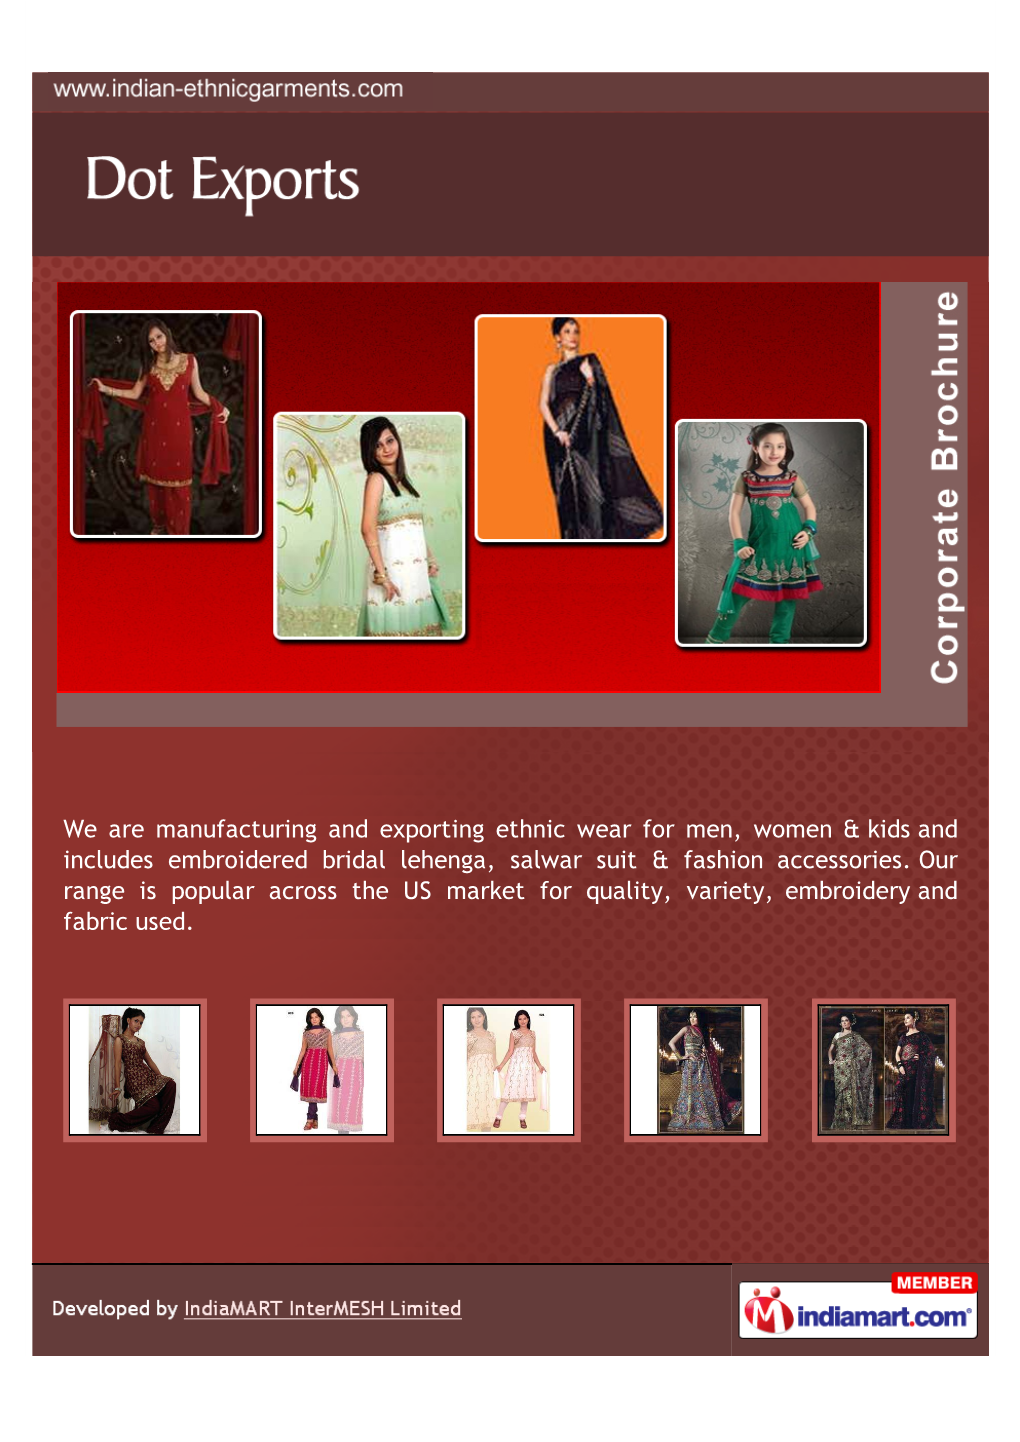 We Are Manufacturing and Exporting Ethnic Wear for Men, Women & Kids